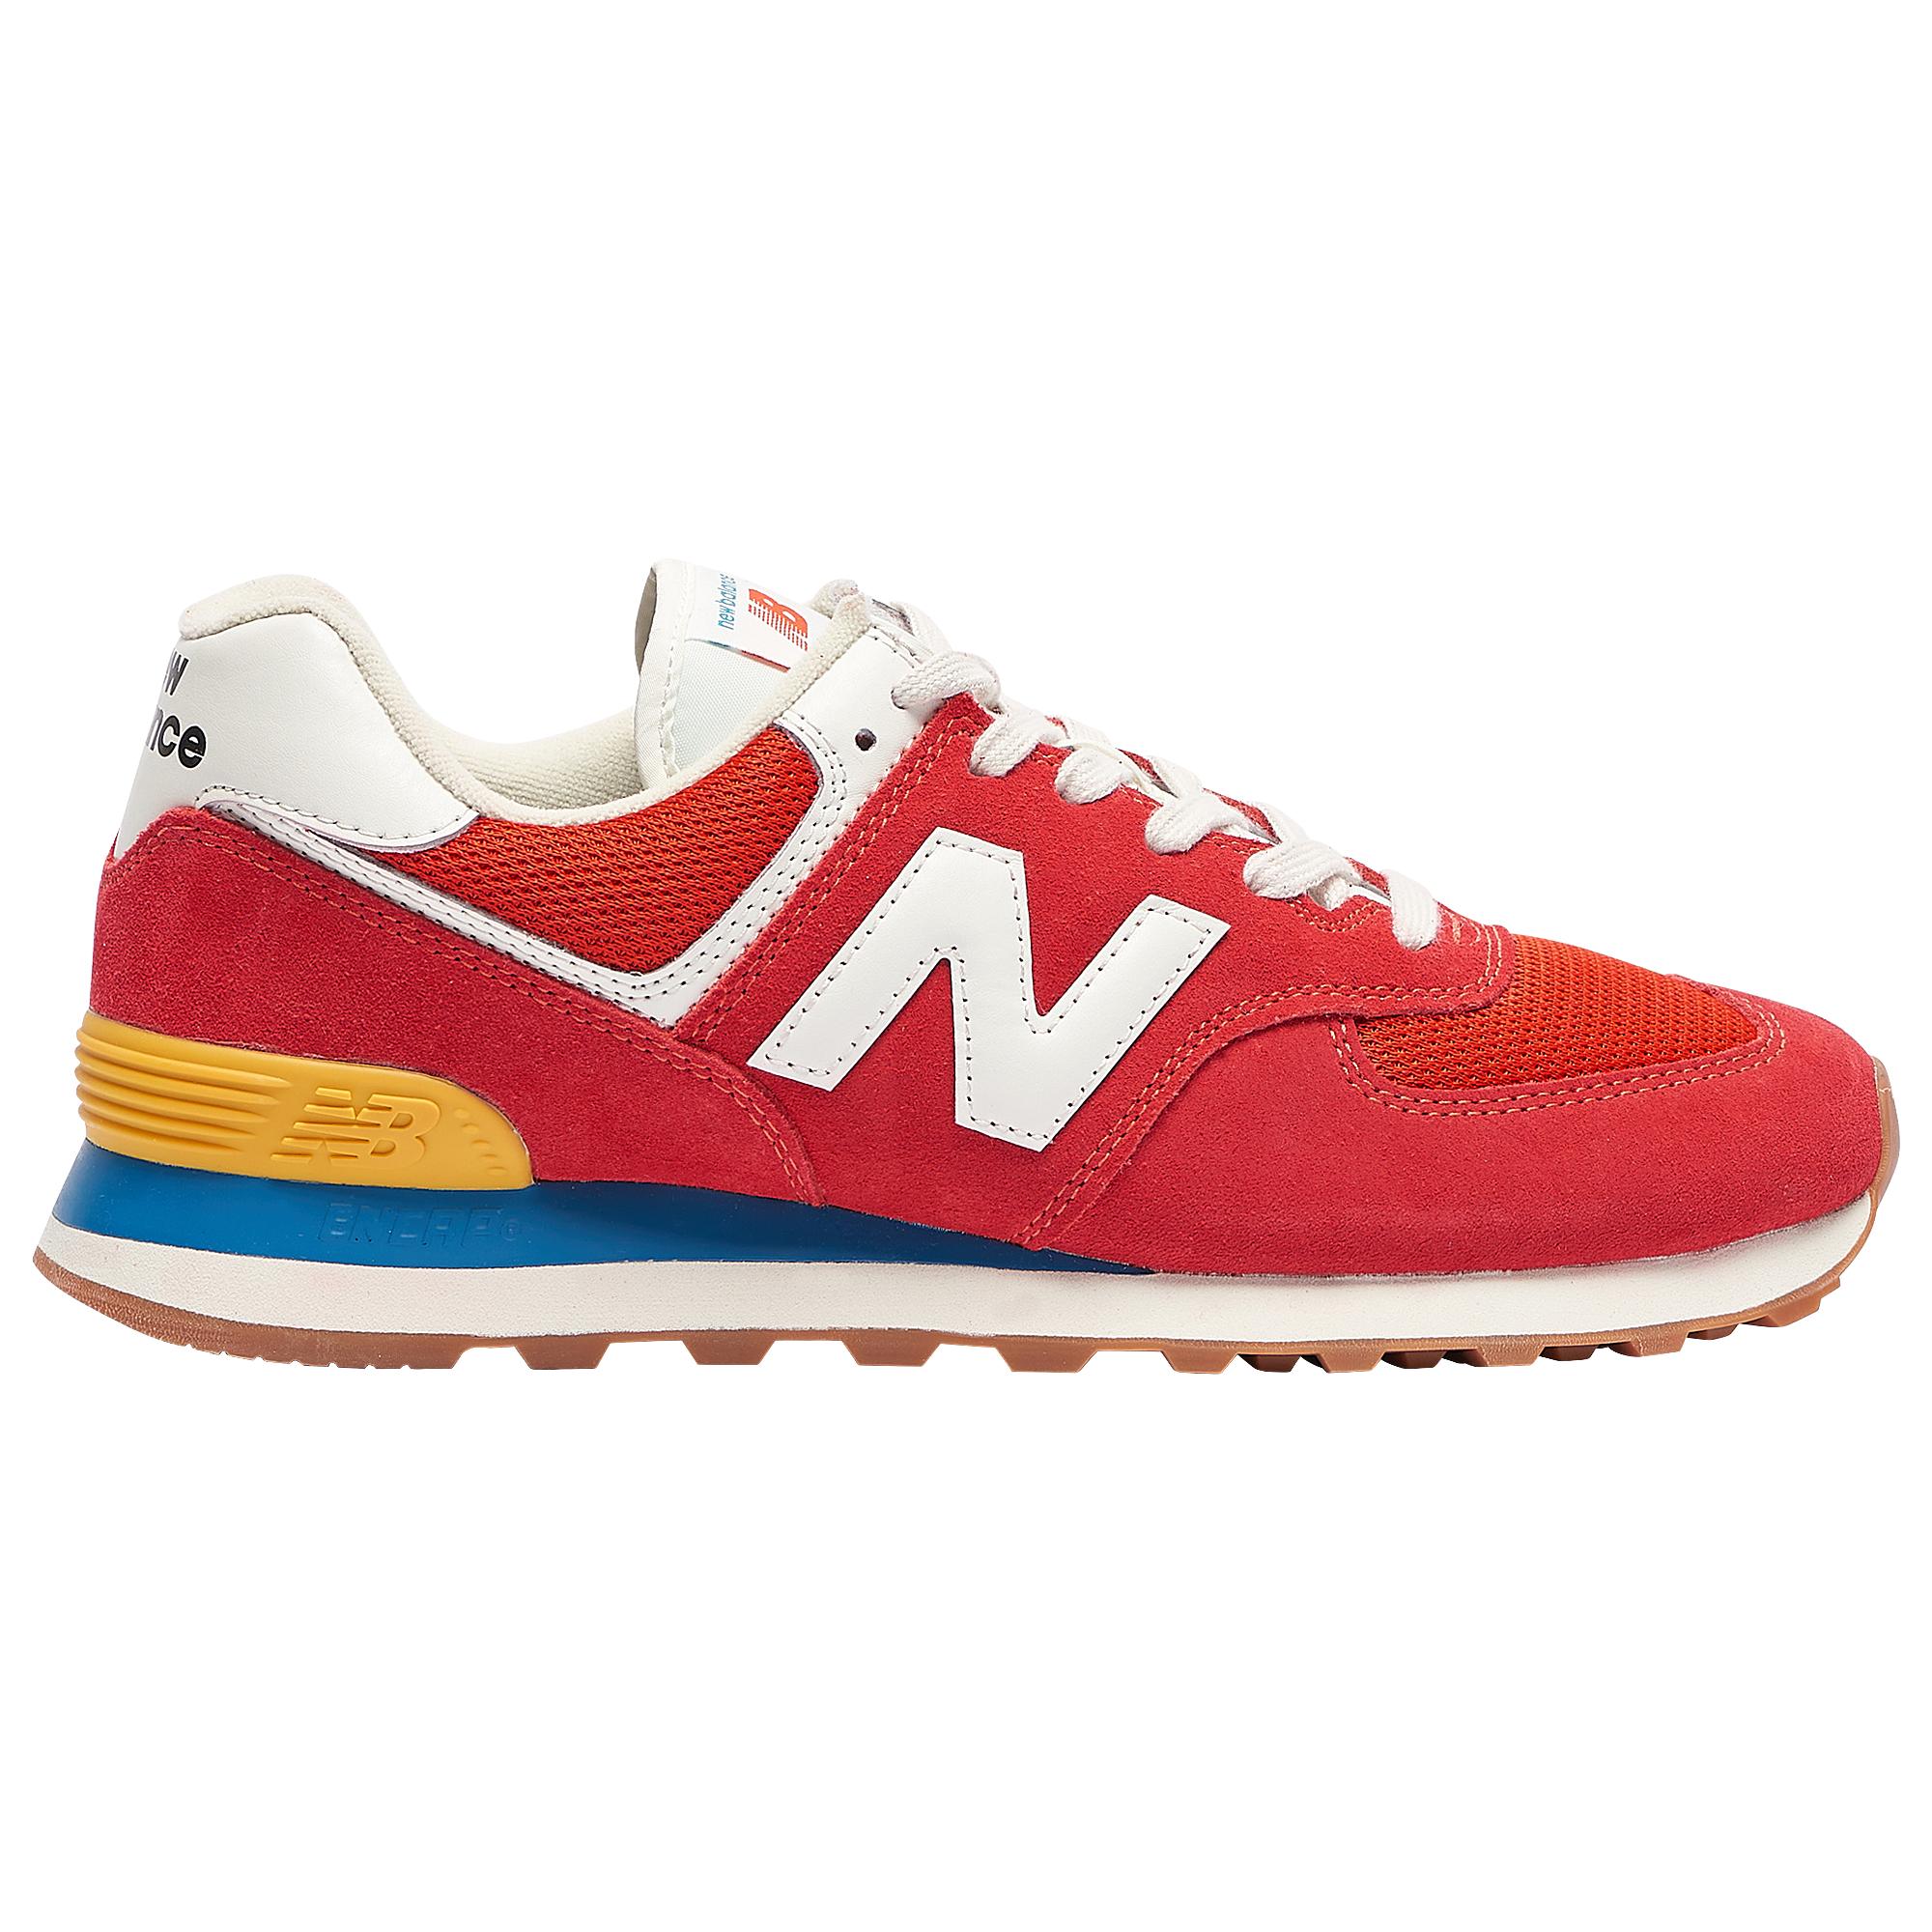 New Balance Leather 574 Classic in Red for Men - Lyst